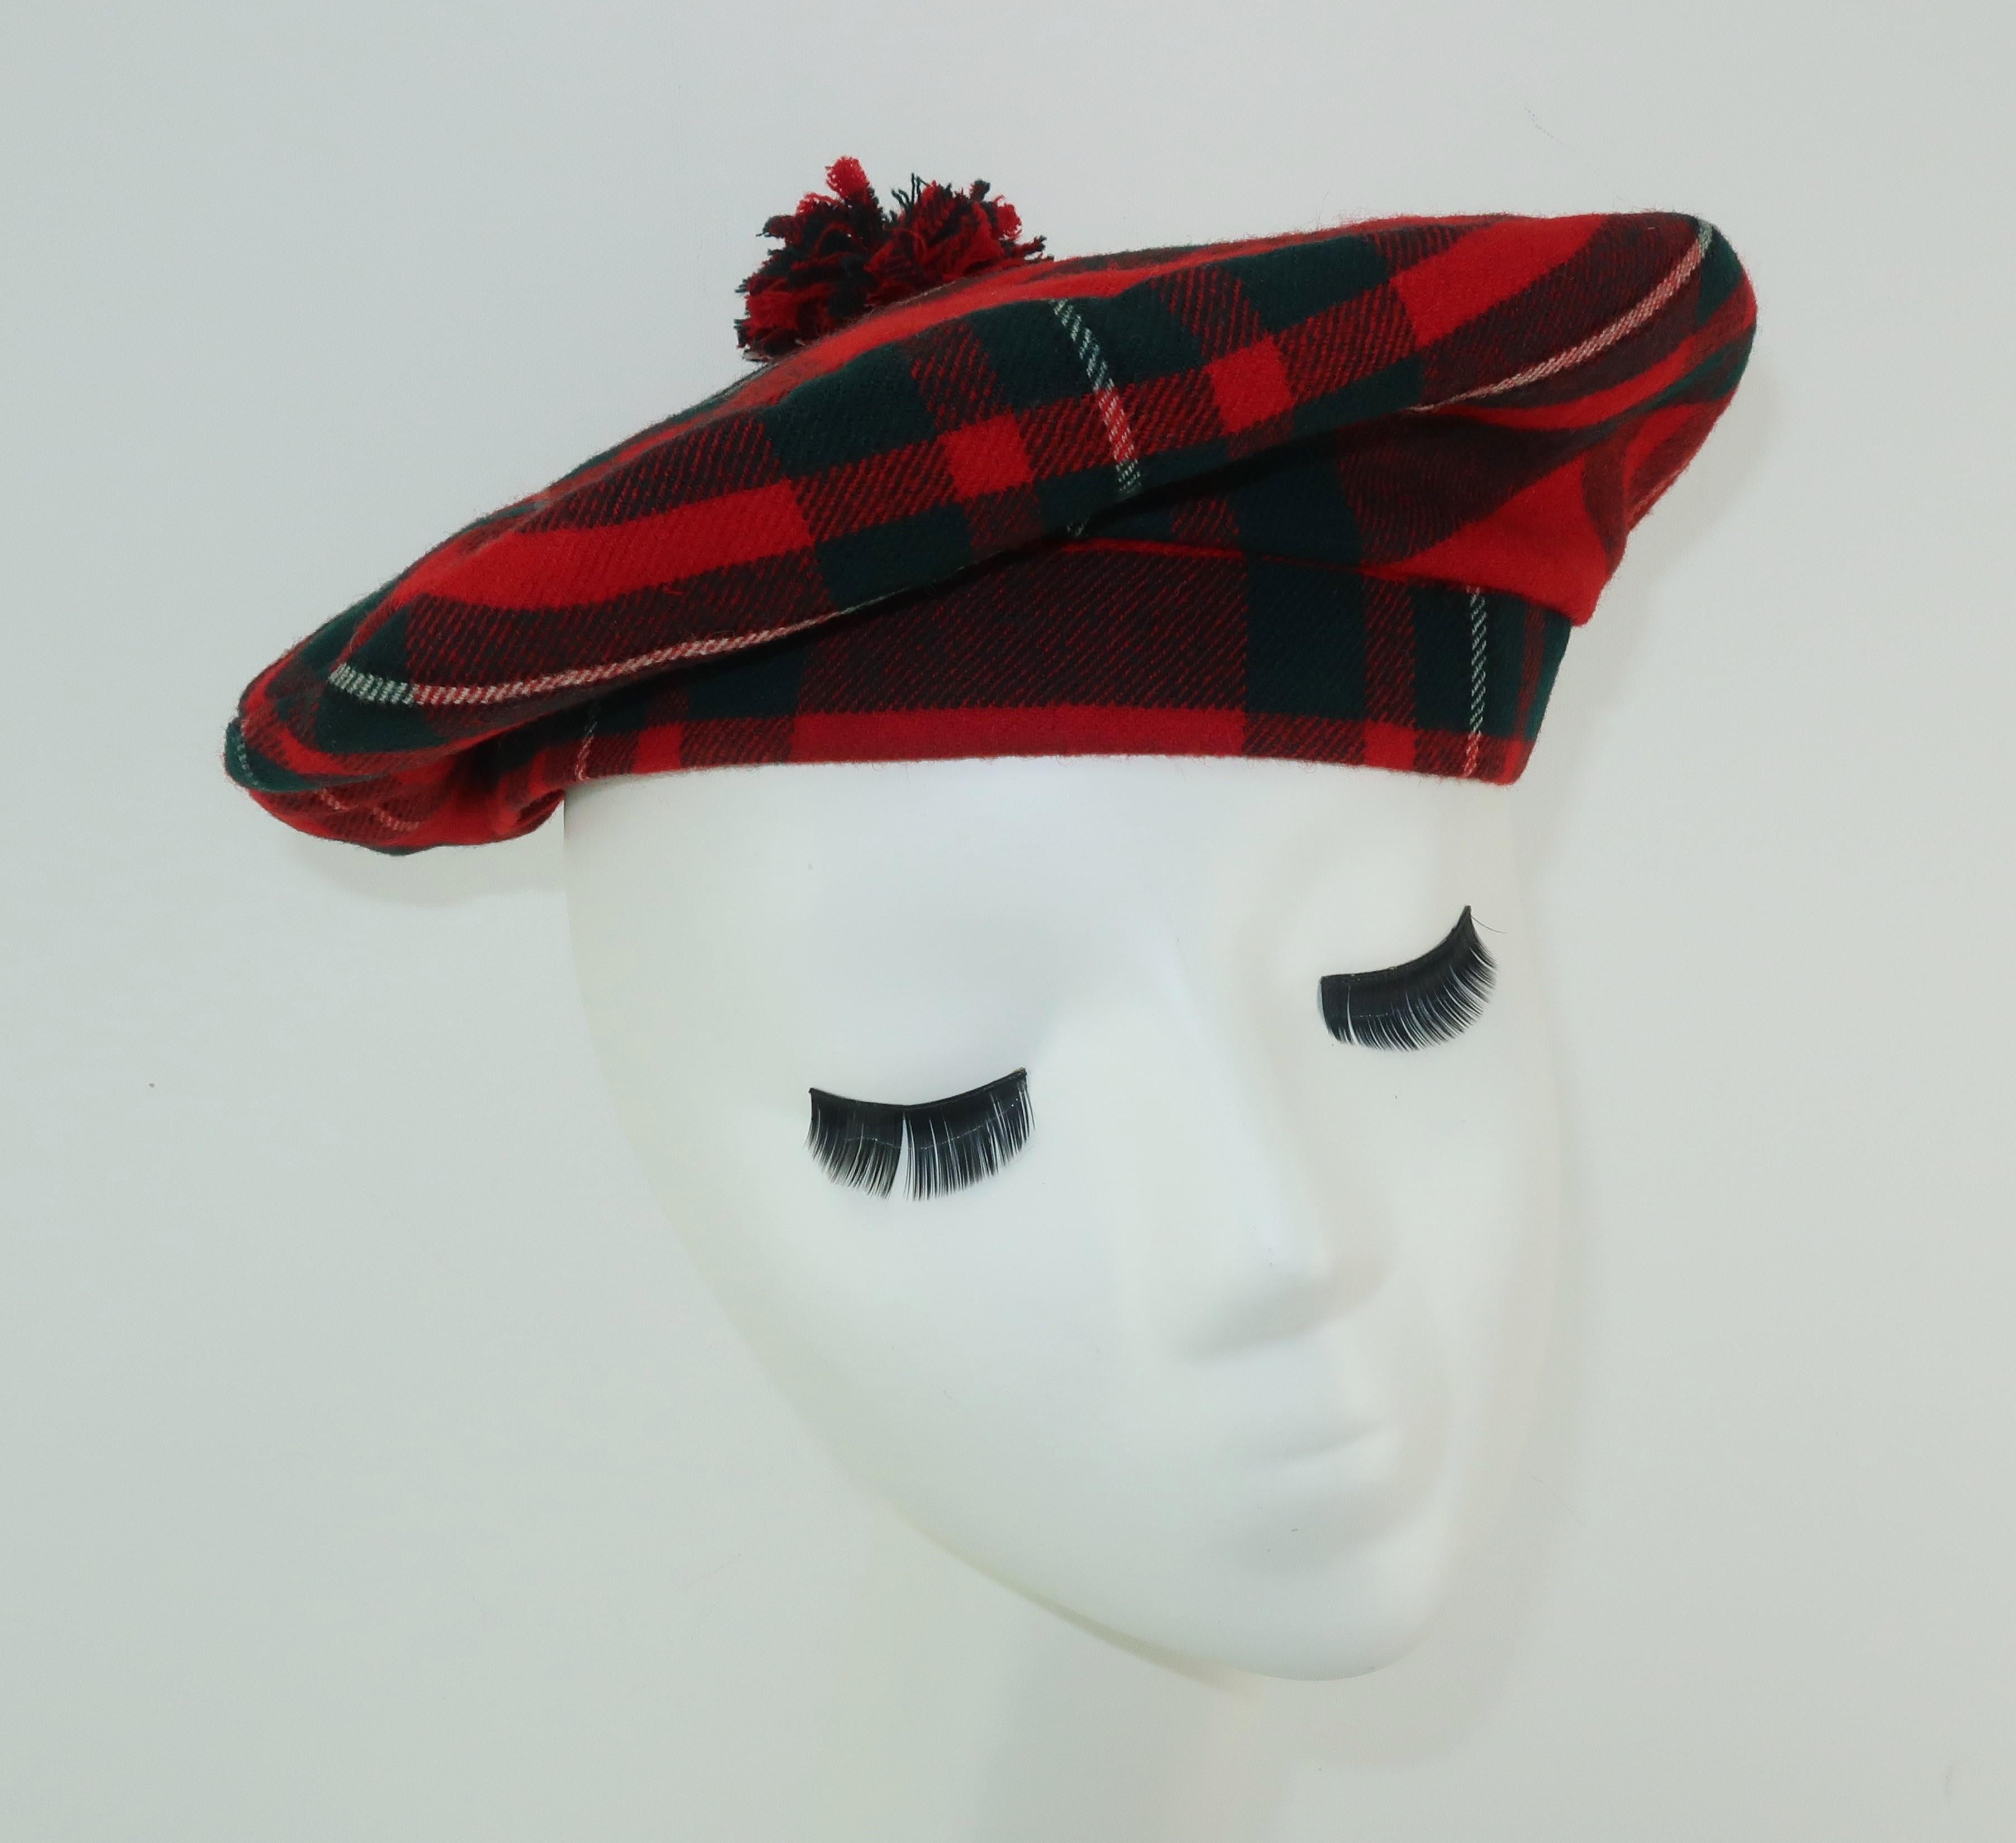 If you are mad for plaid then you will love this classic tam hat by Donald MacLean & Tartan House. The beret silhouette can be worn forward, pushed back or cocked to the side for a good dose of Scottish style.  The traditional wool body incorporates